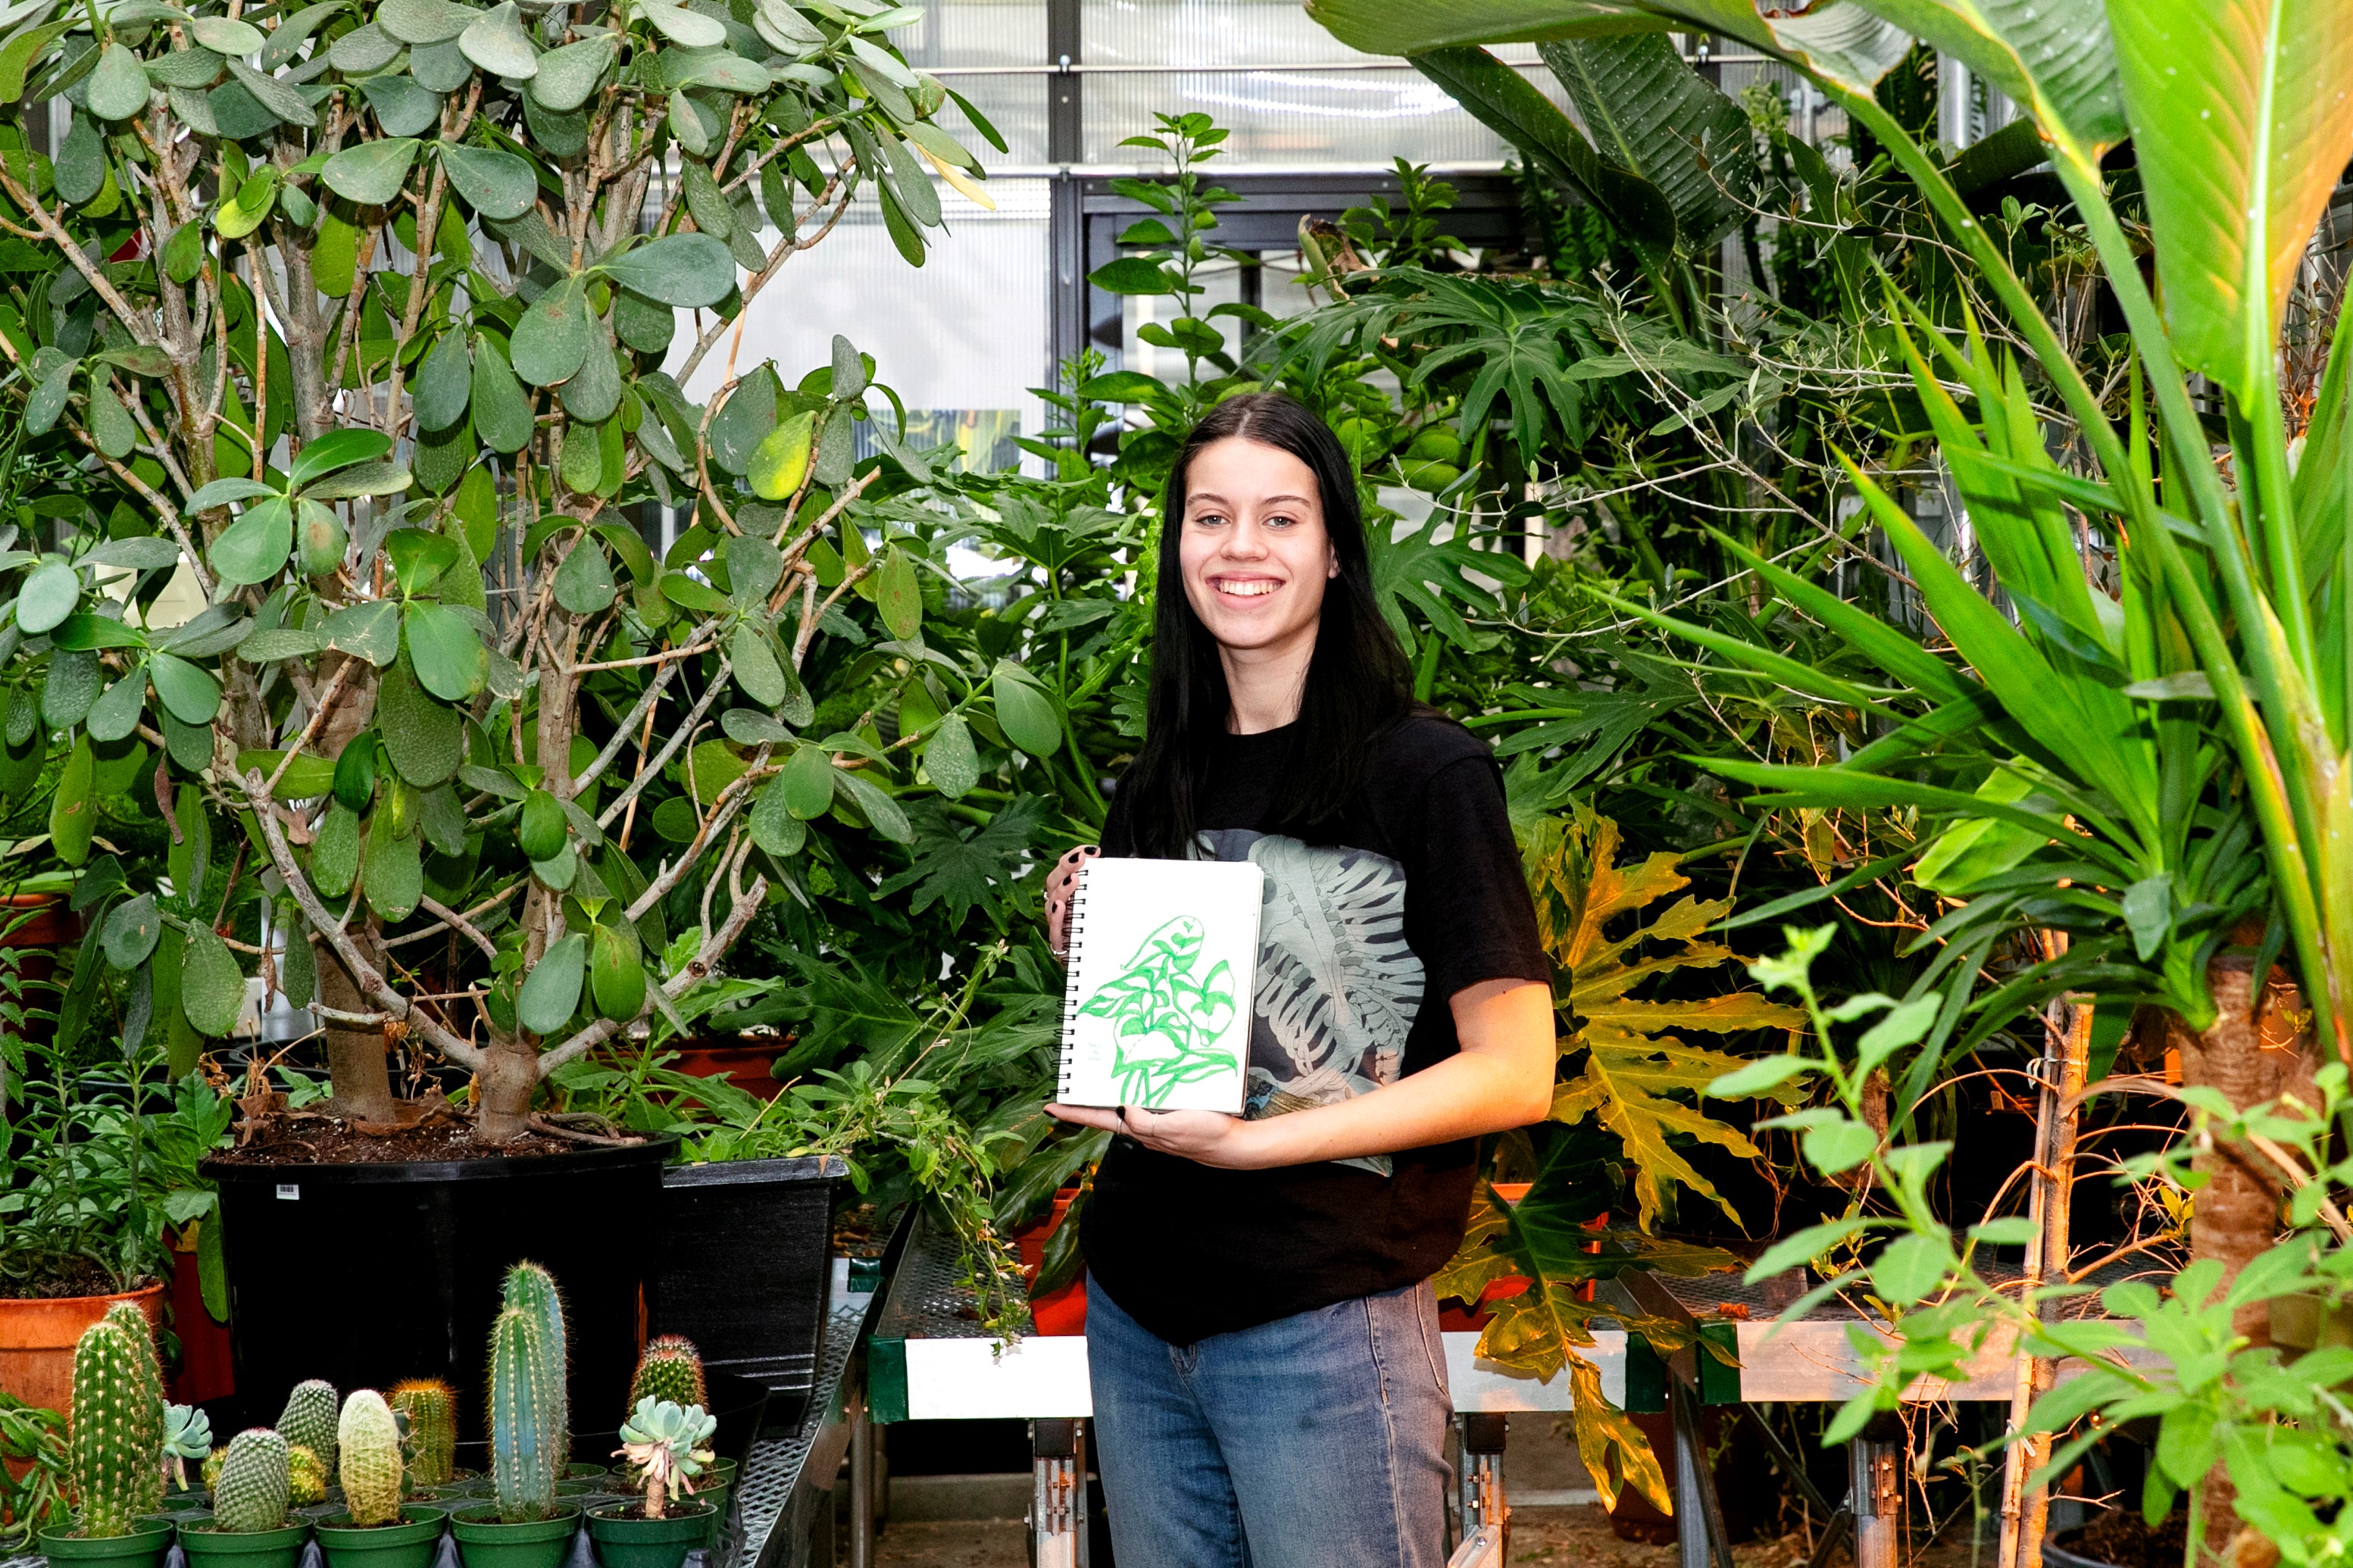 Biology and studio art double major Allison Conwell ’25, who plans to pursue a career in scientific illustration, shows one of her illustrations during a visit to the Billie Tisch Center for Integrated Sciences greenhouse.